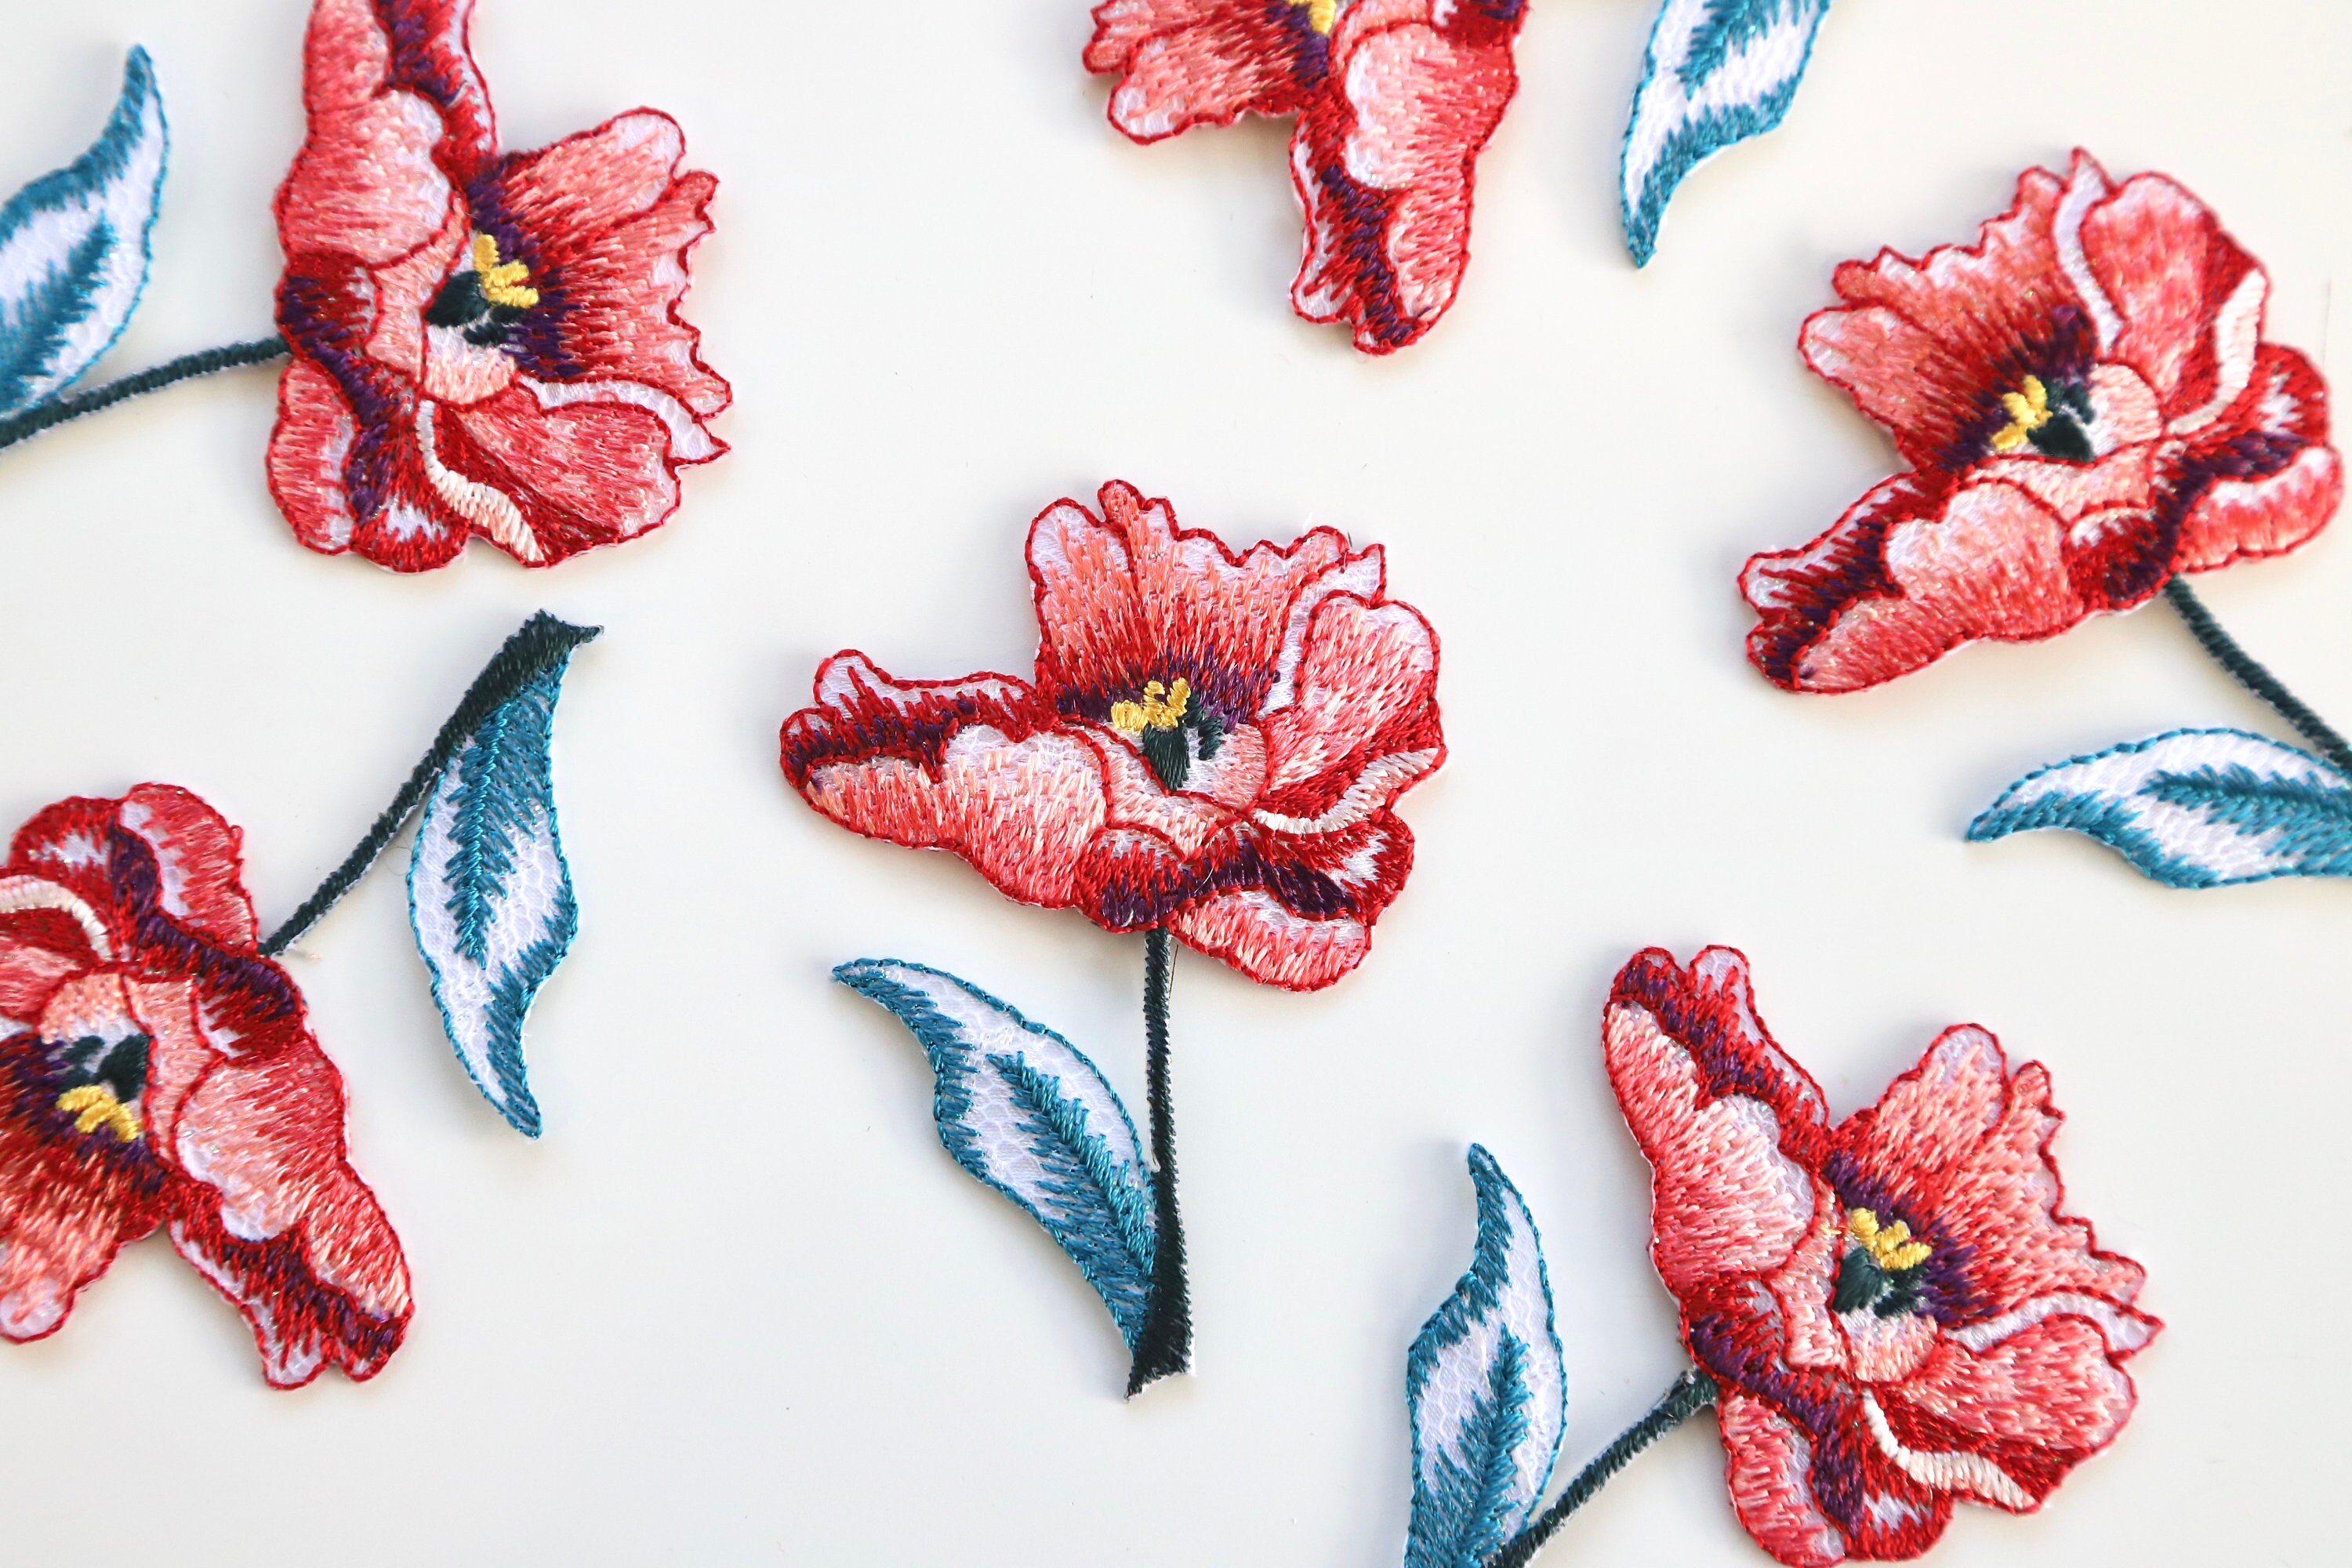 Pretty Poppy Flower Multi-Color Embroidered Iron-On Patch Applique